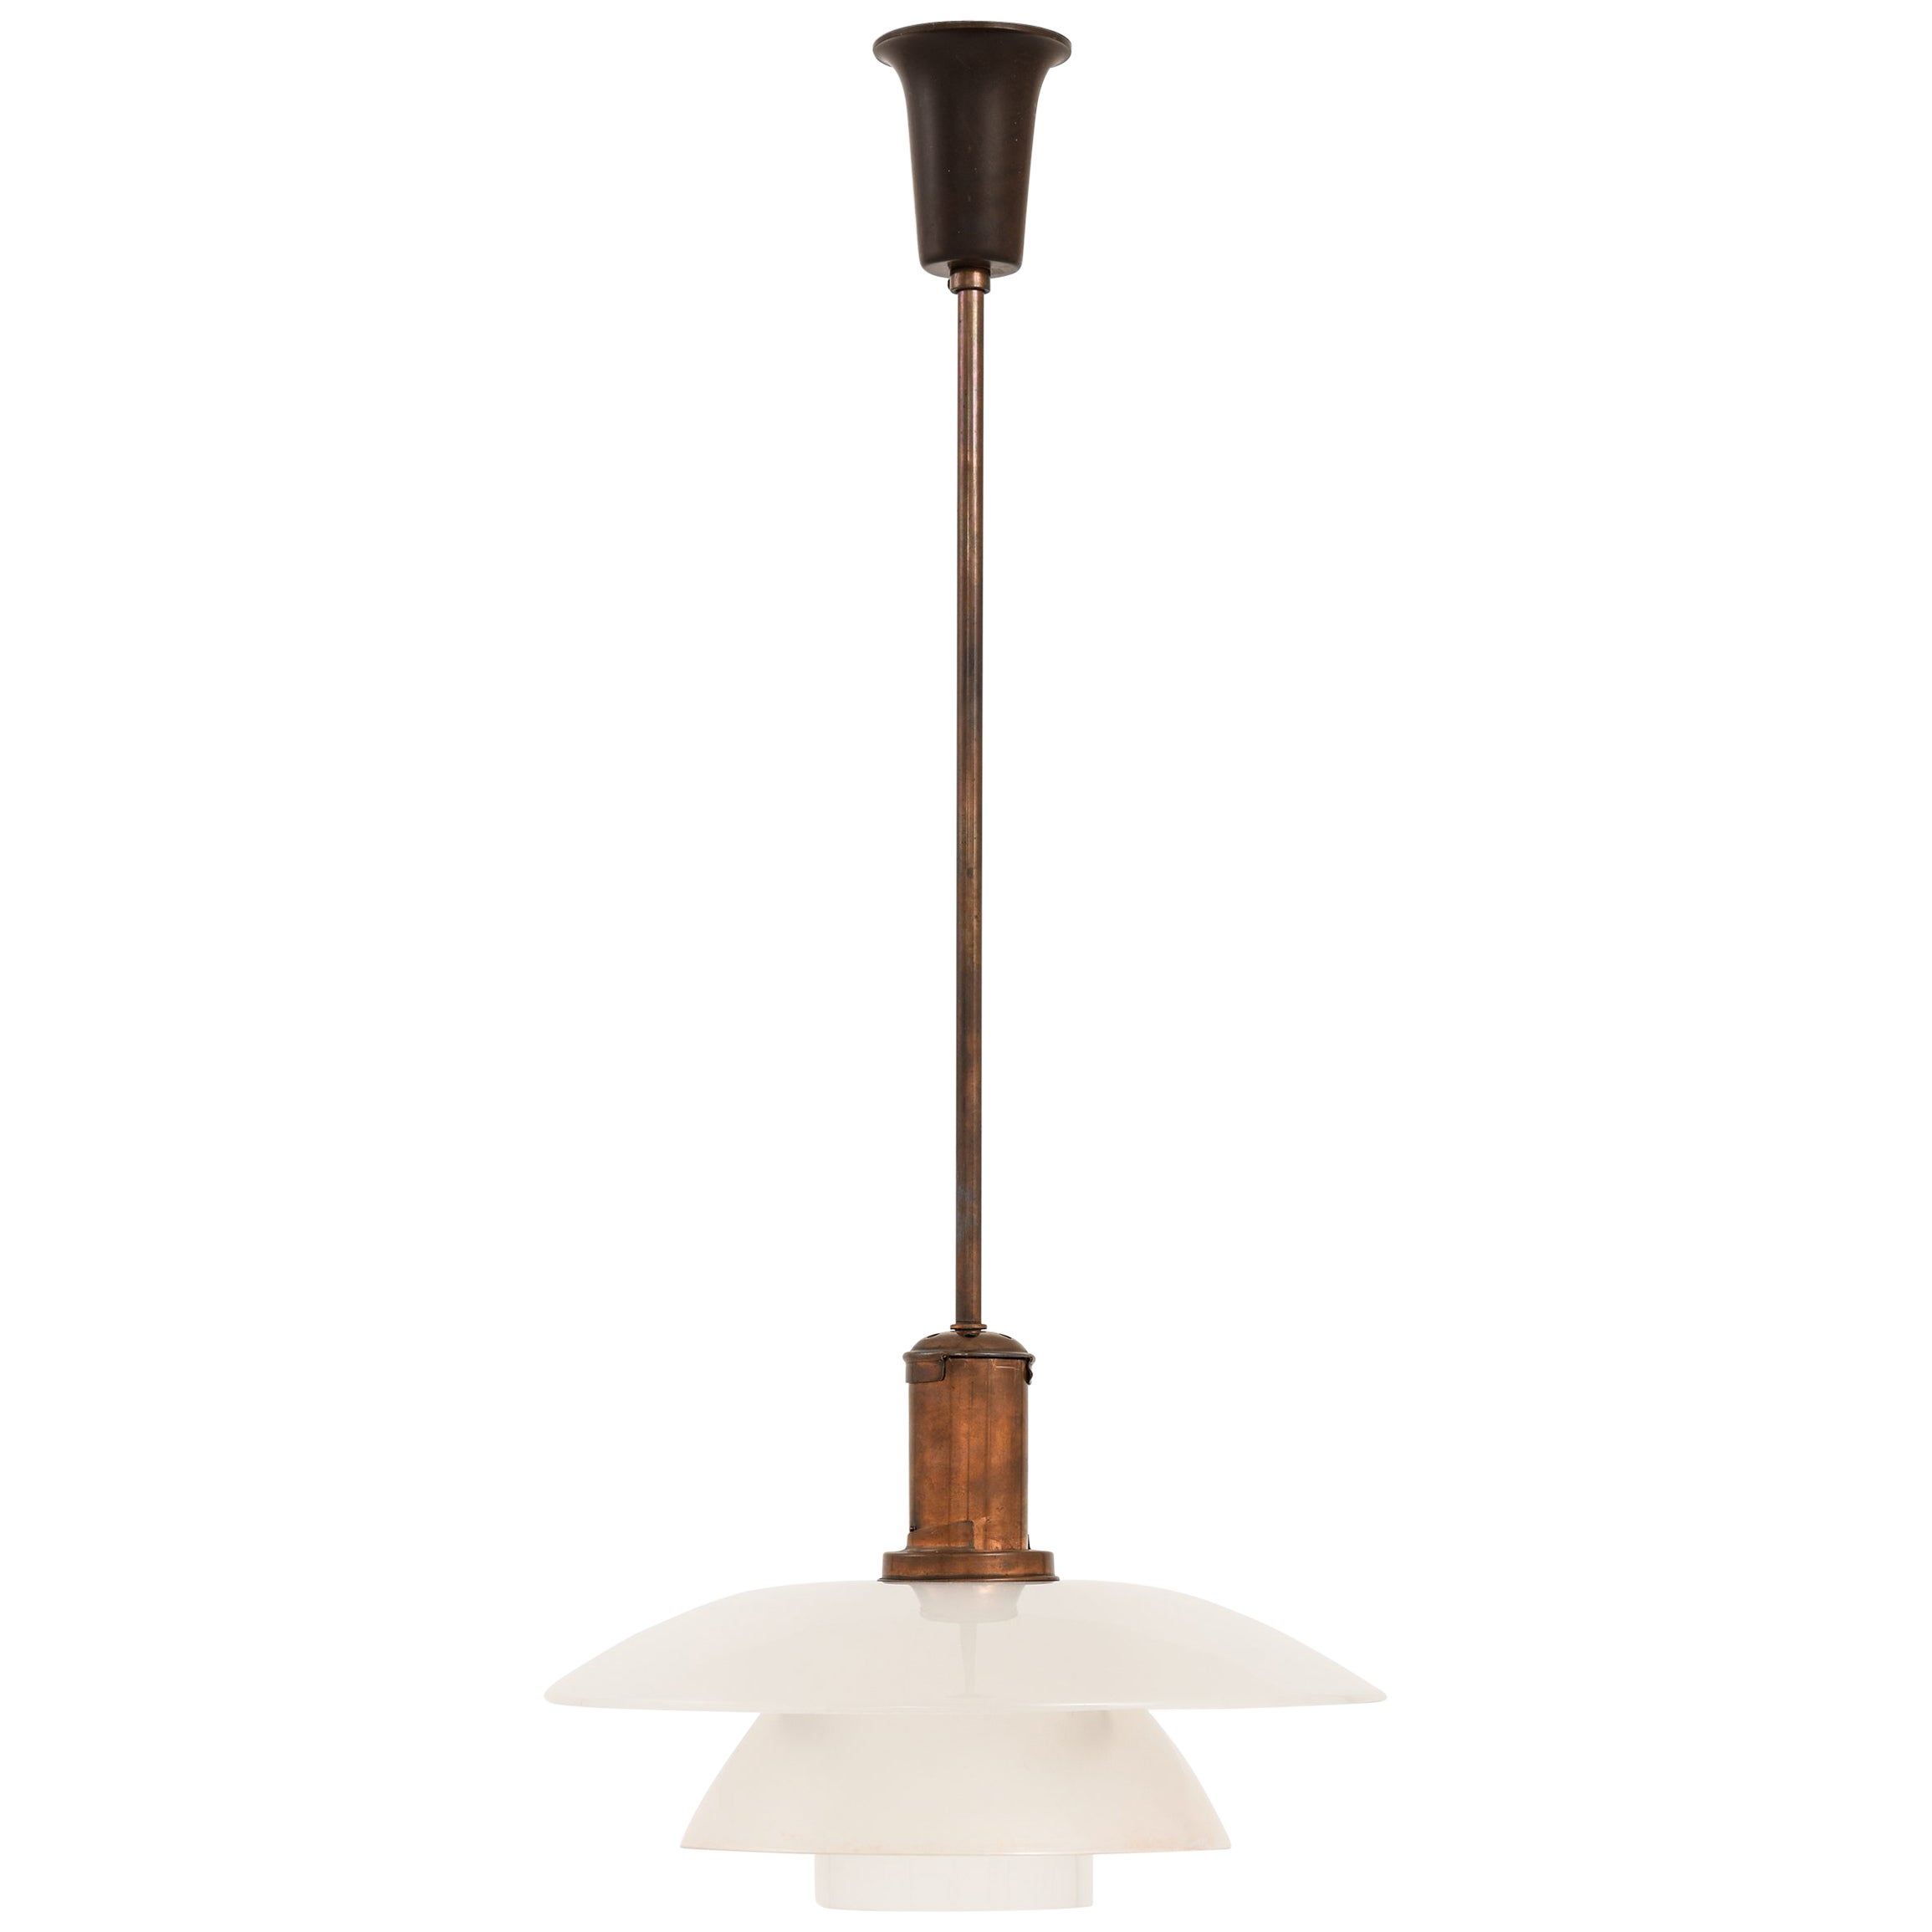 Ceiling Lamp in Copper-Plated Brass and Frosted Glass by Poul Henningsen, 1930's For Sale